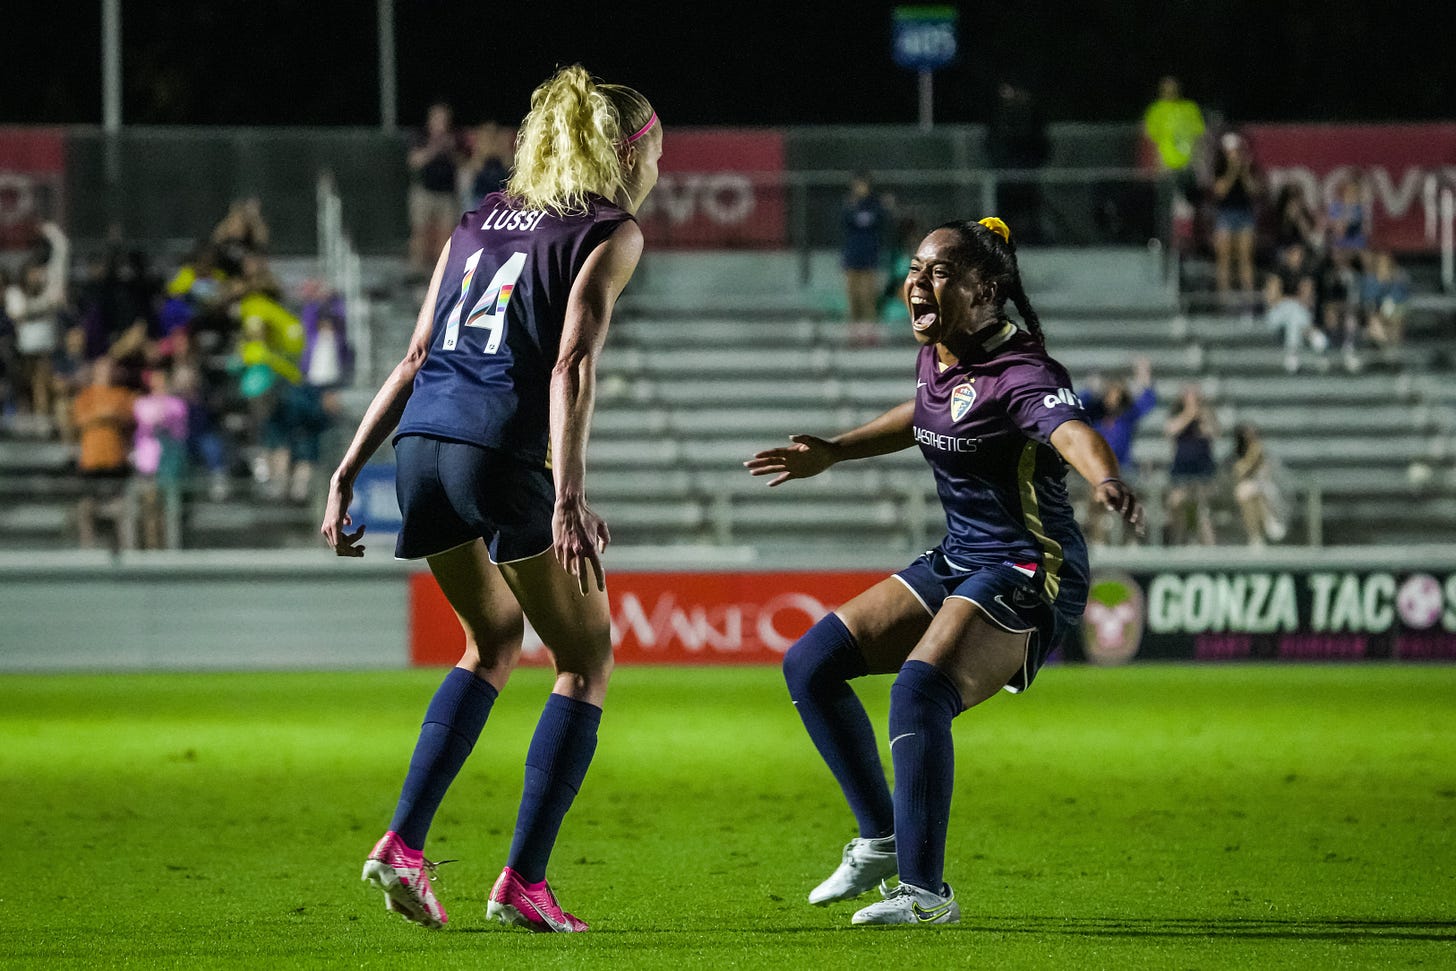 North Carolina Courage players Tyler Lussi and Kiki Pickett celebrate Lussi's goal against the Houston Dash.